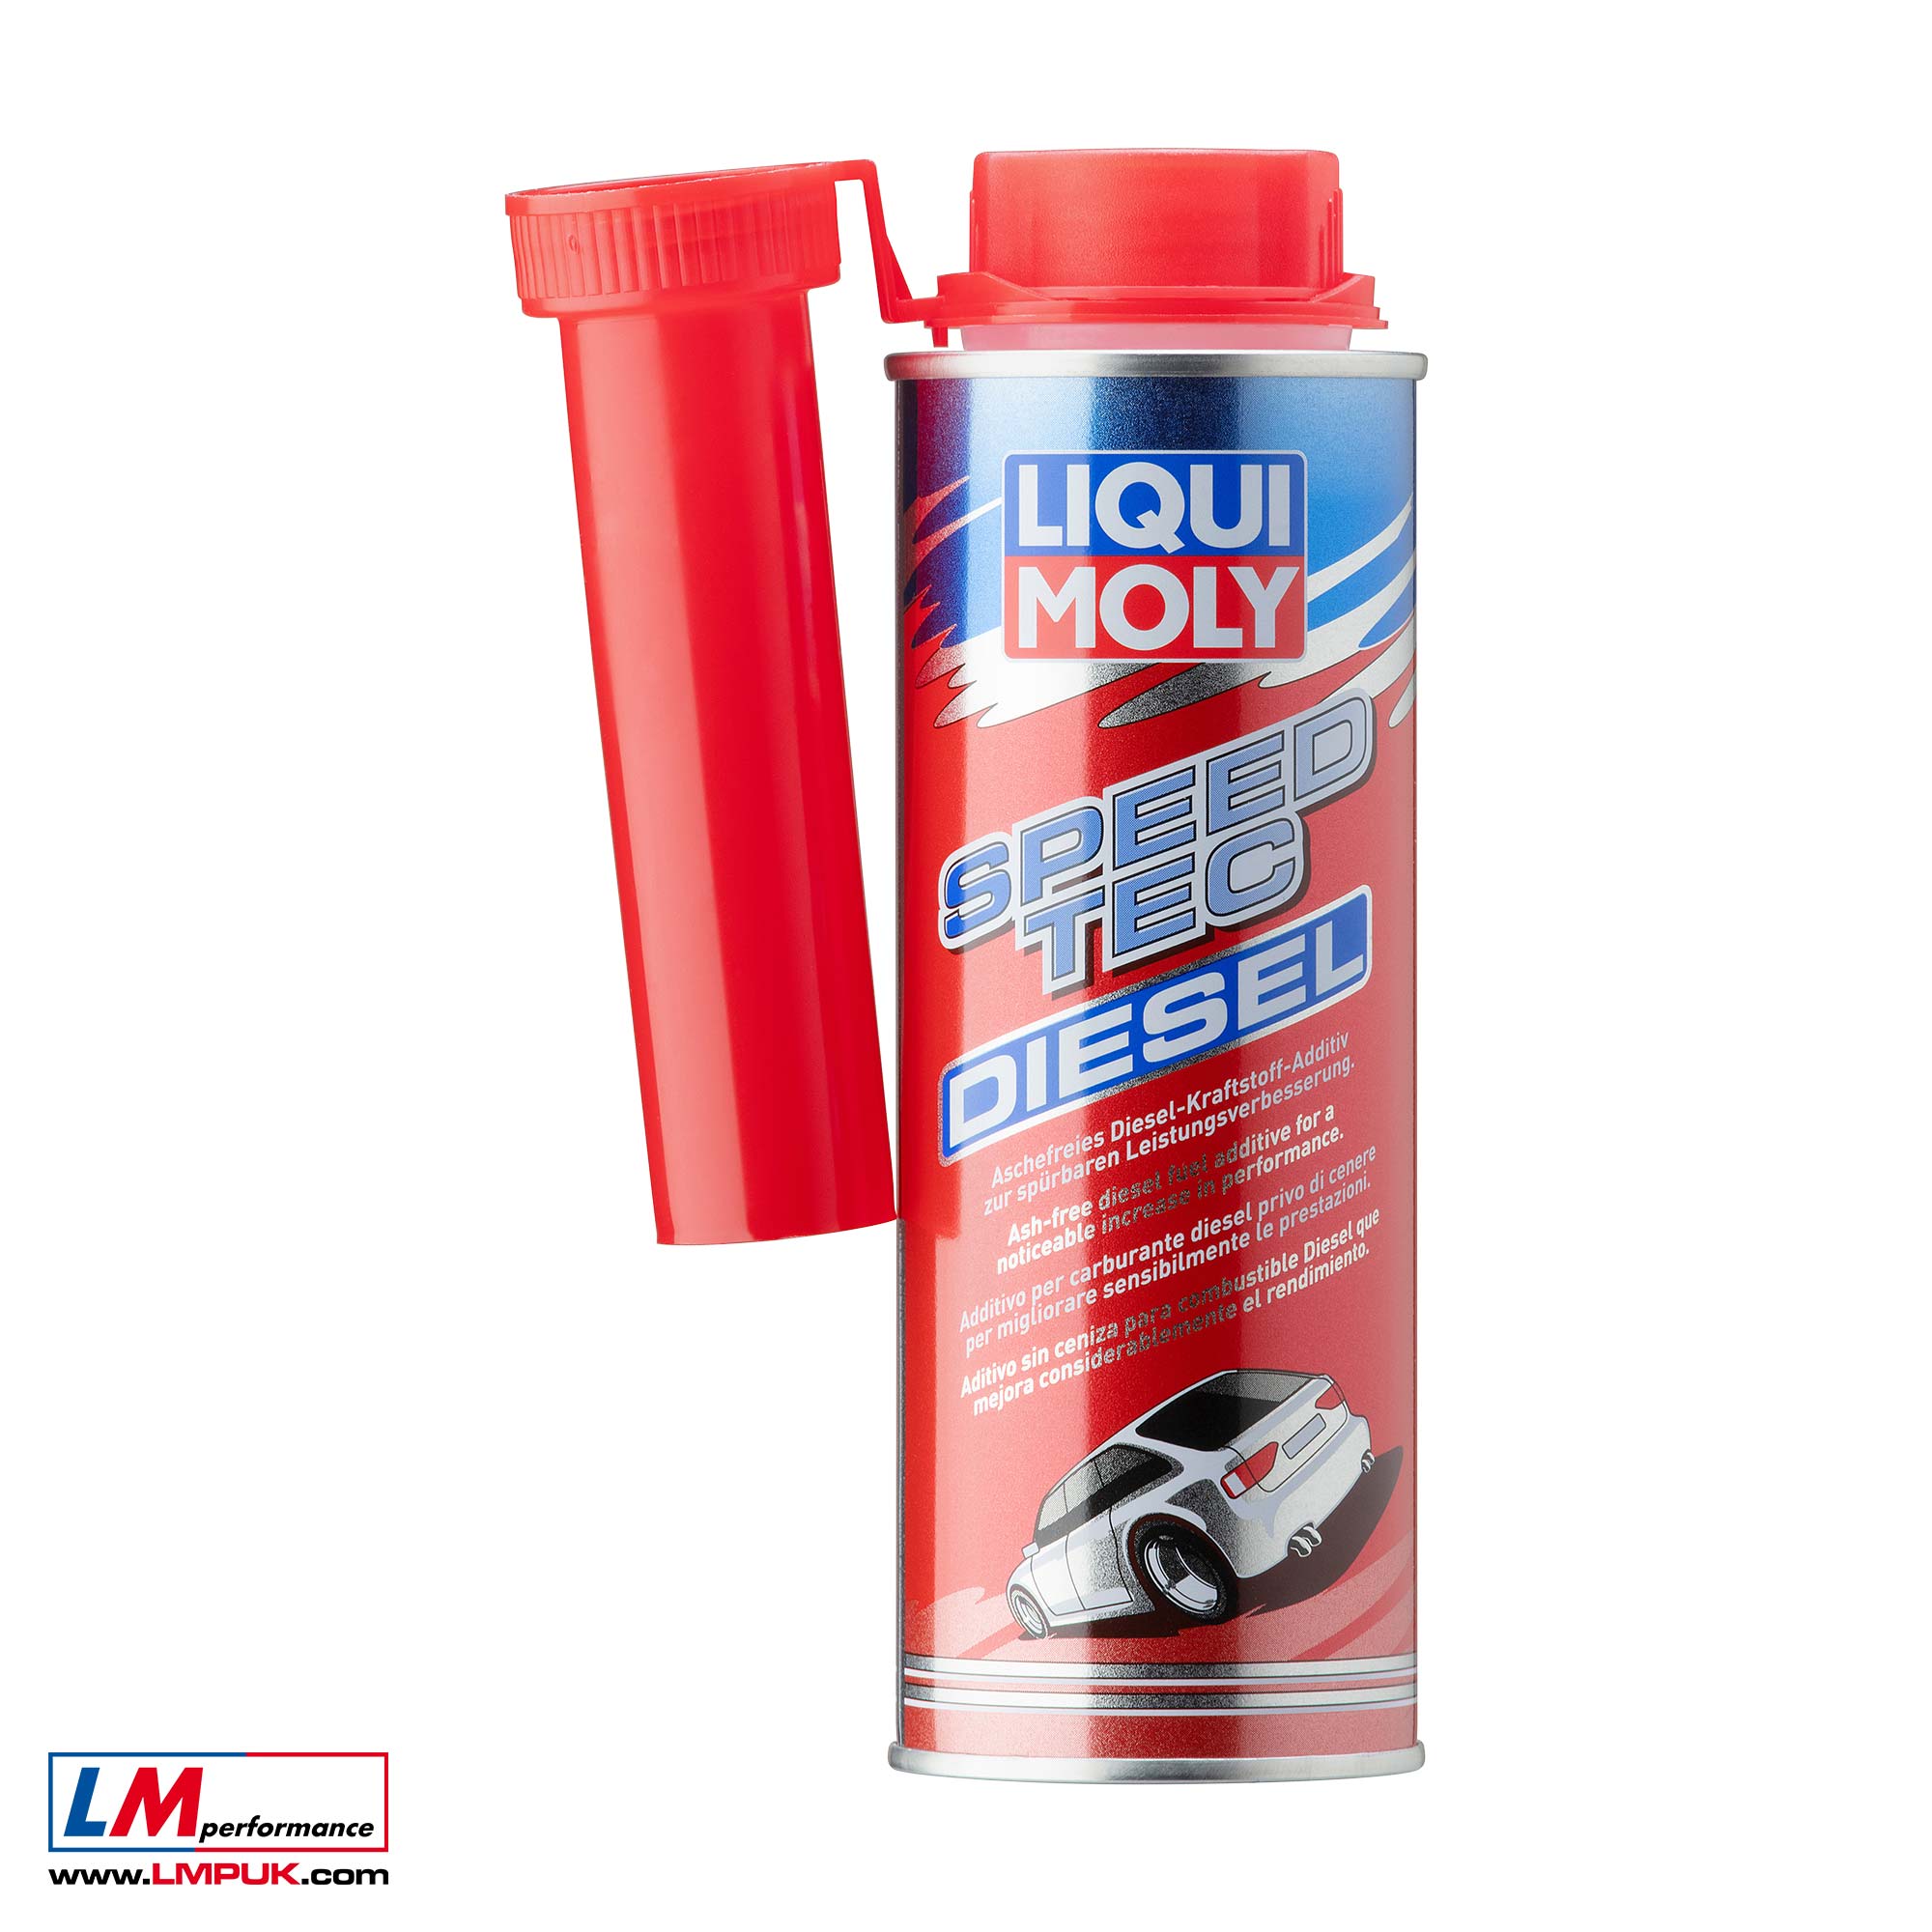 Speed Tec Diesel by LIQUI MOLY – LM Performance